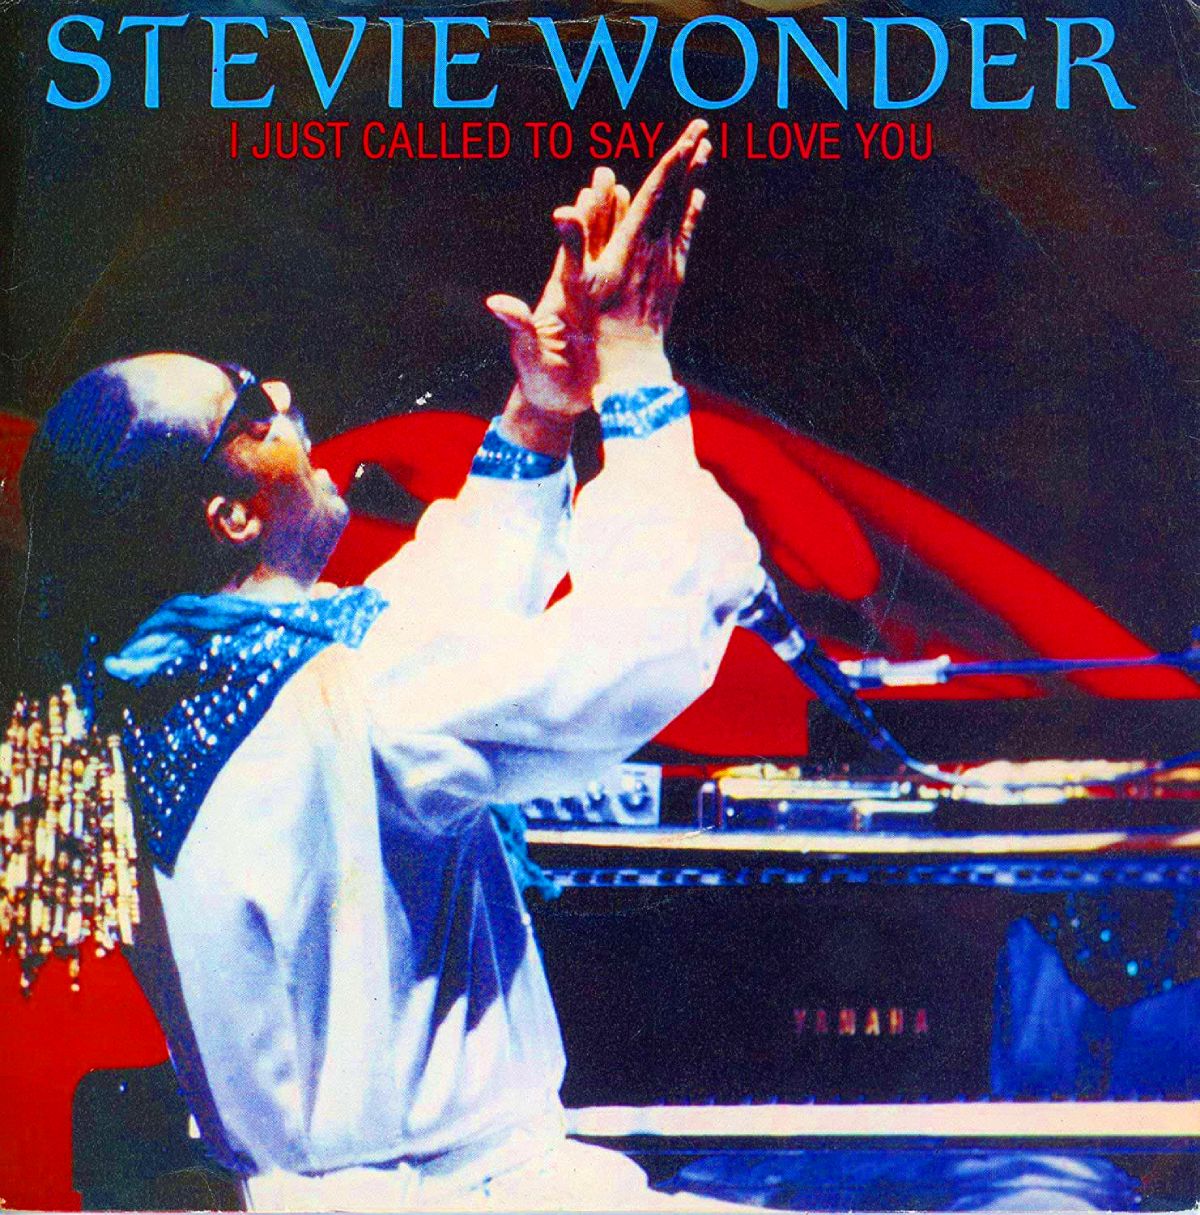 I Just Called to Say I Love You (1984) - Stevie Wonder - Single-Cover